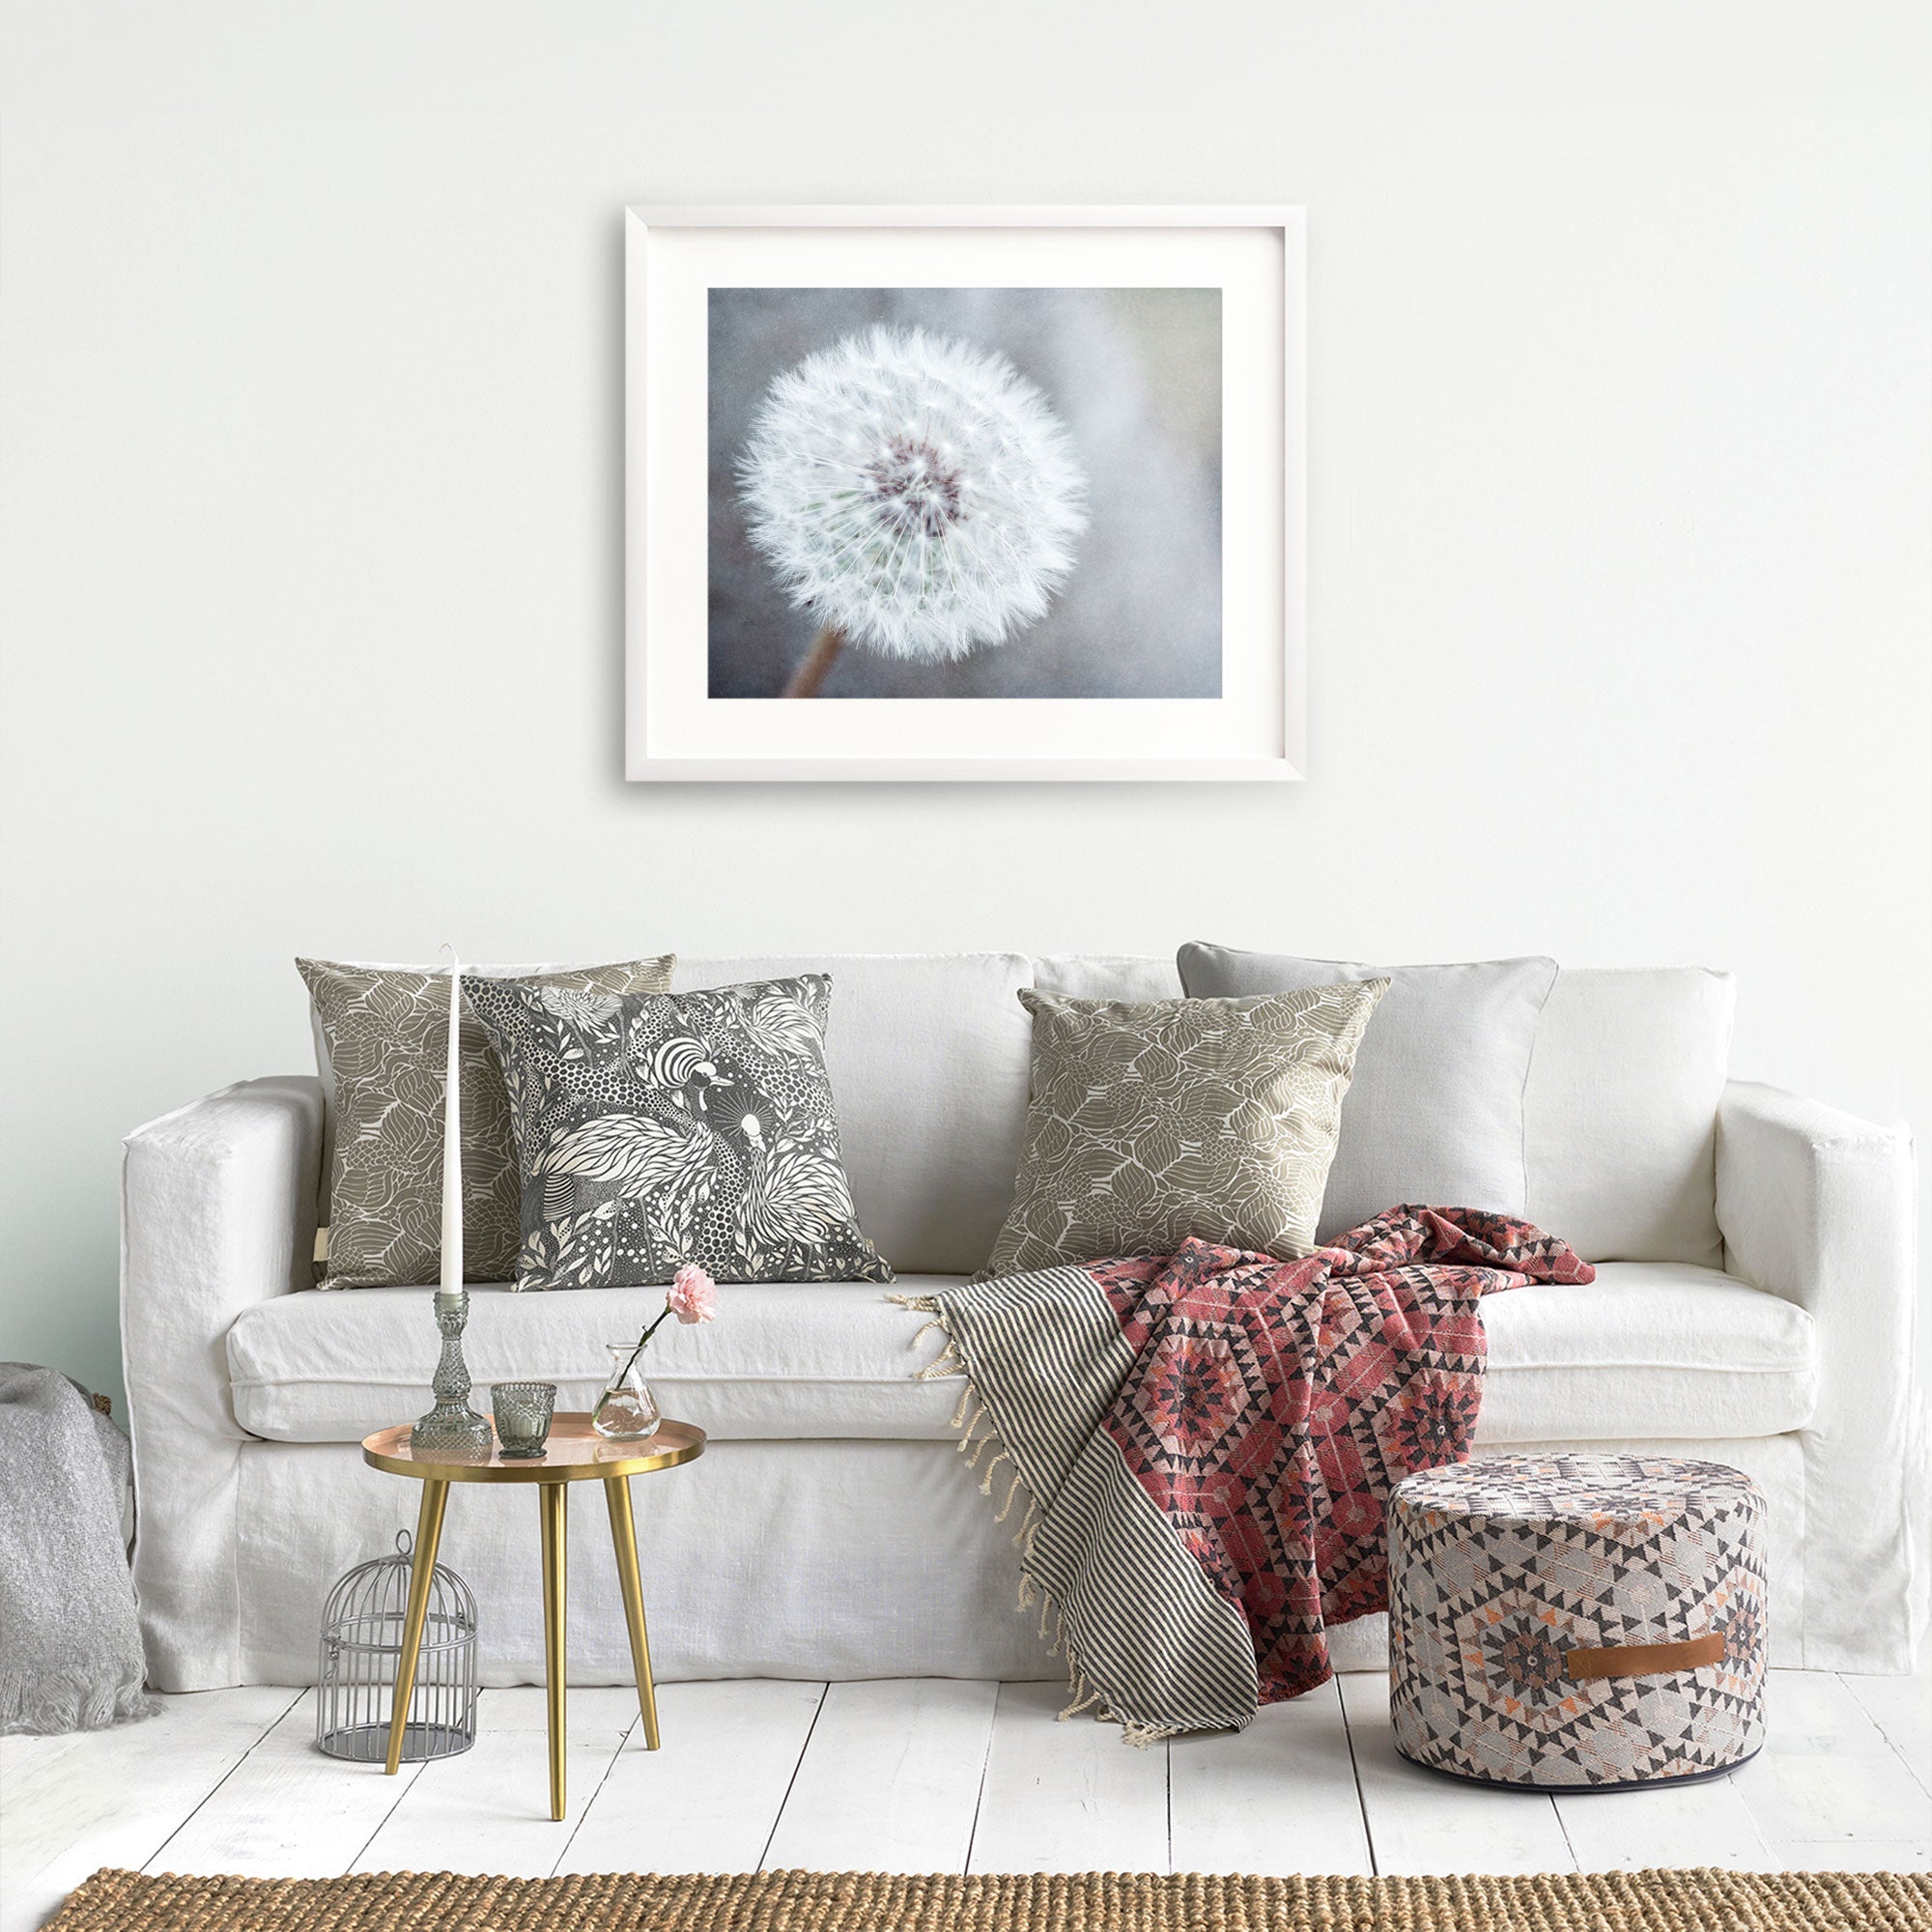 A cozy living room scene featuring a white sofa with decorative pillows, an unframed Neutral Grey Floral Print of a dandelion on the wall, a small round table with books, a birdcage, and &#39;Dandelion King&#39; by Offley Green.